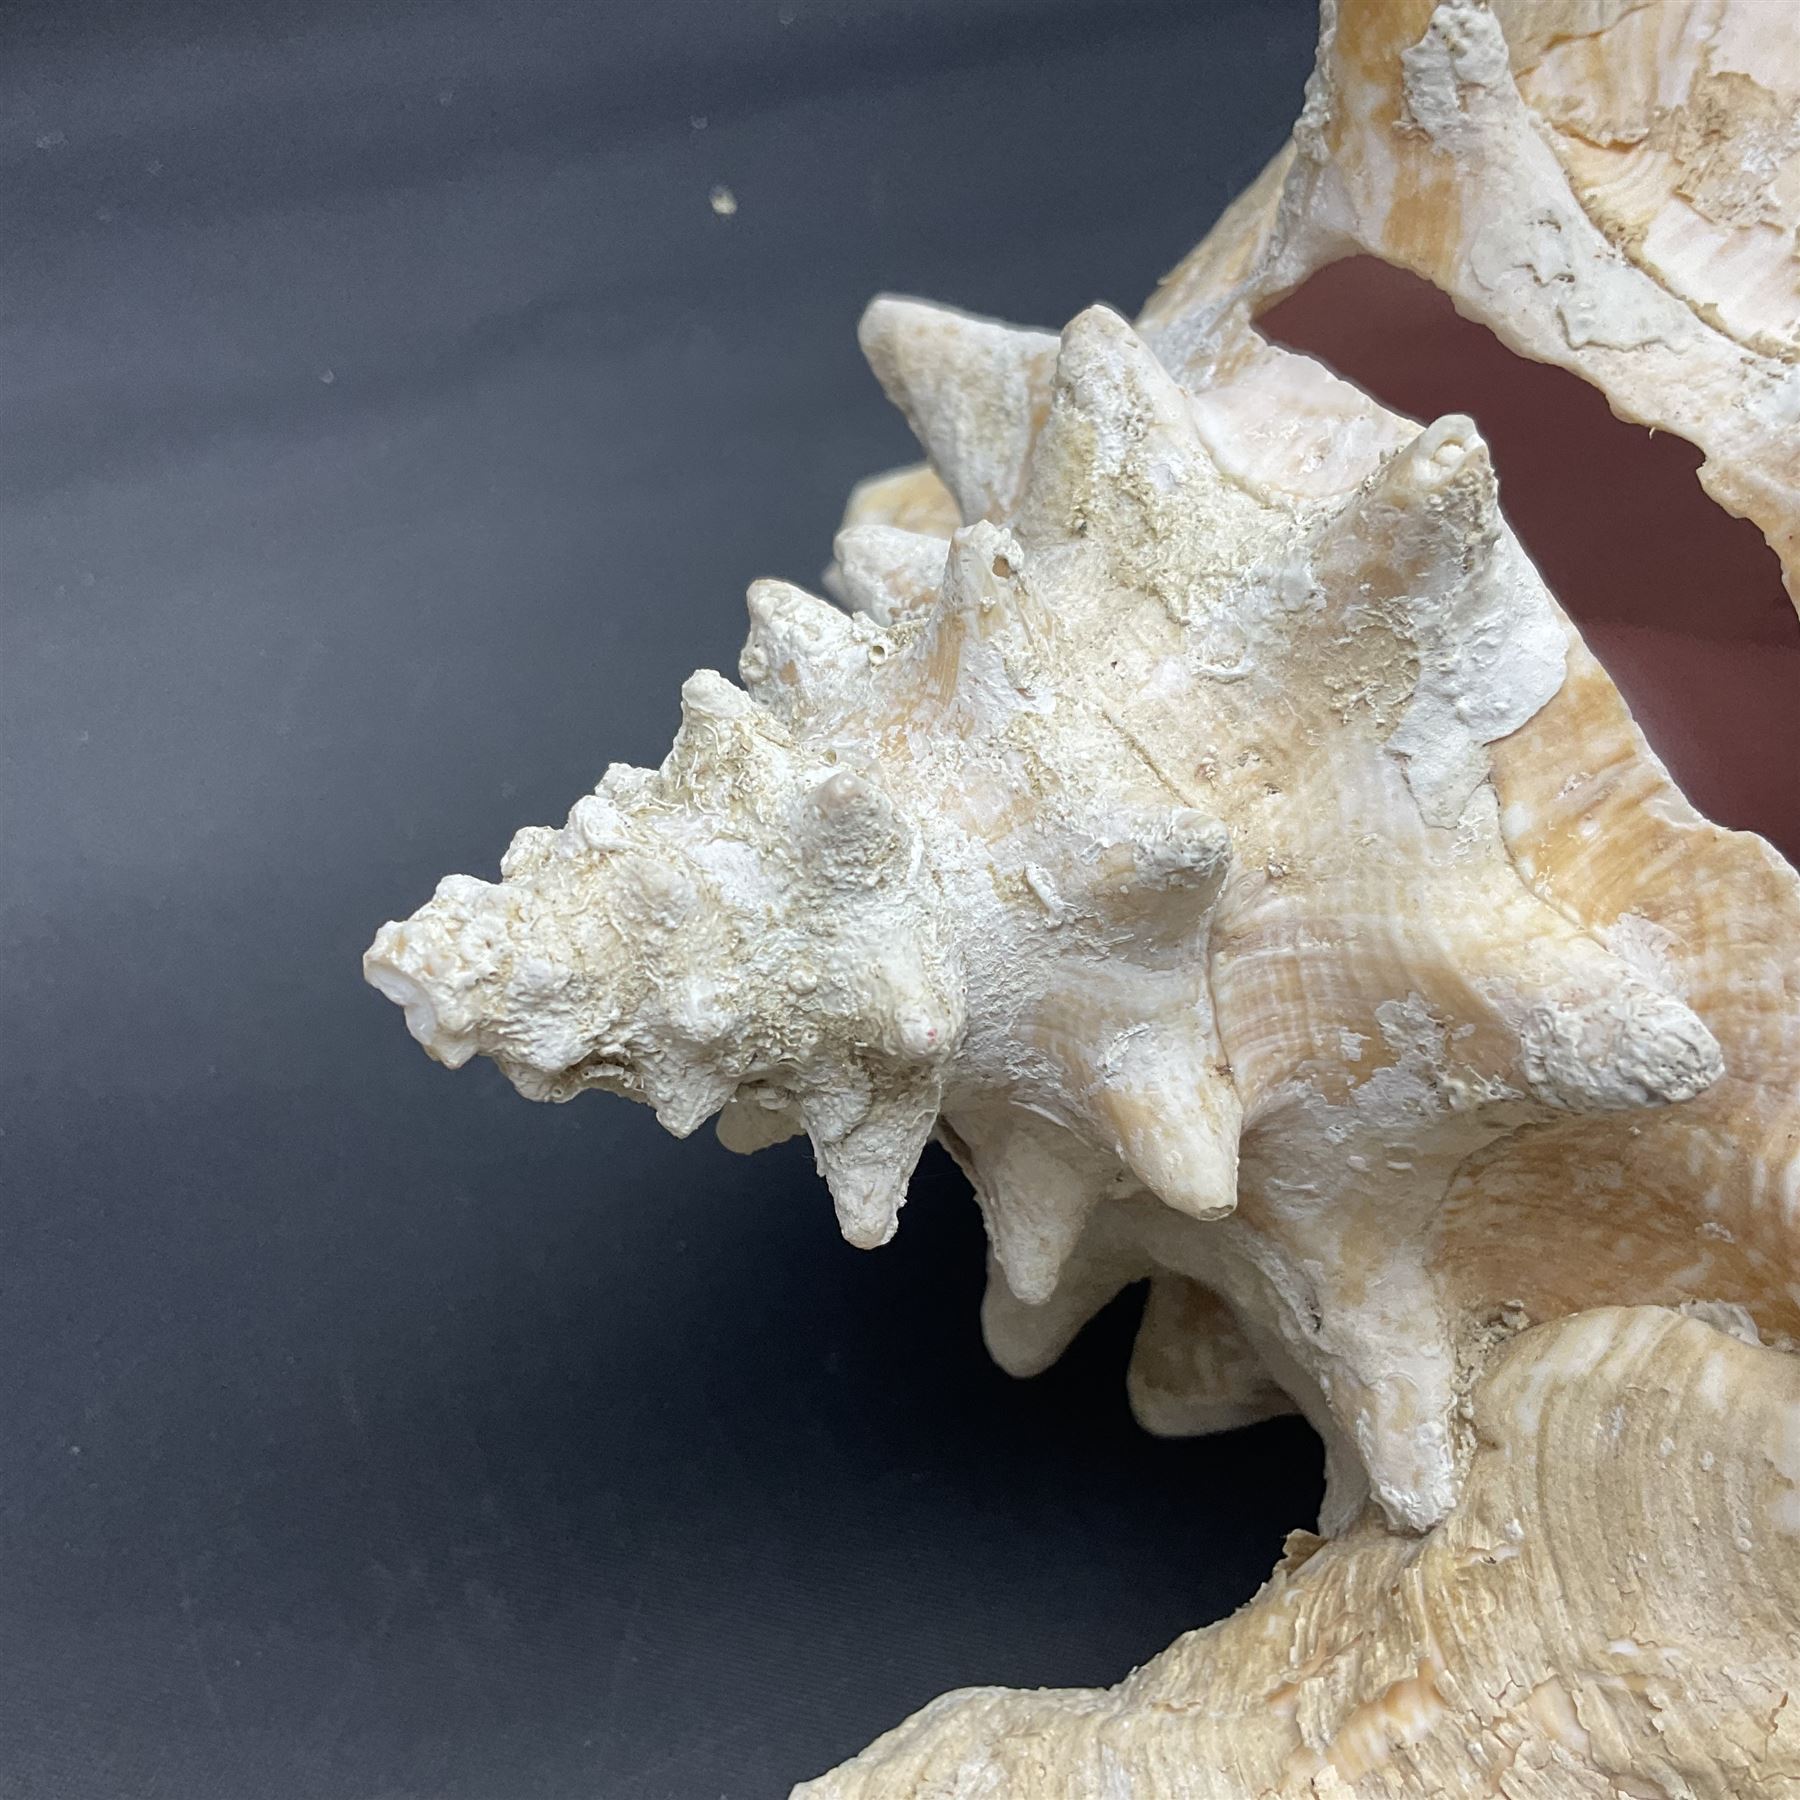 Conchology: selection of conch shells - Image 23 of 28